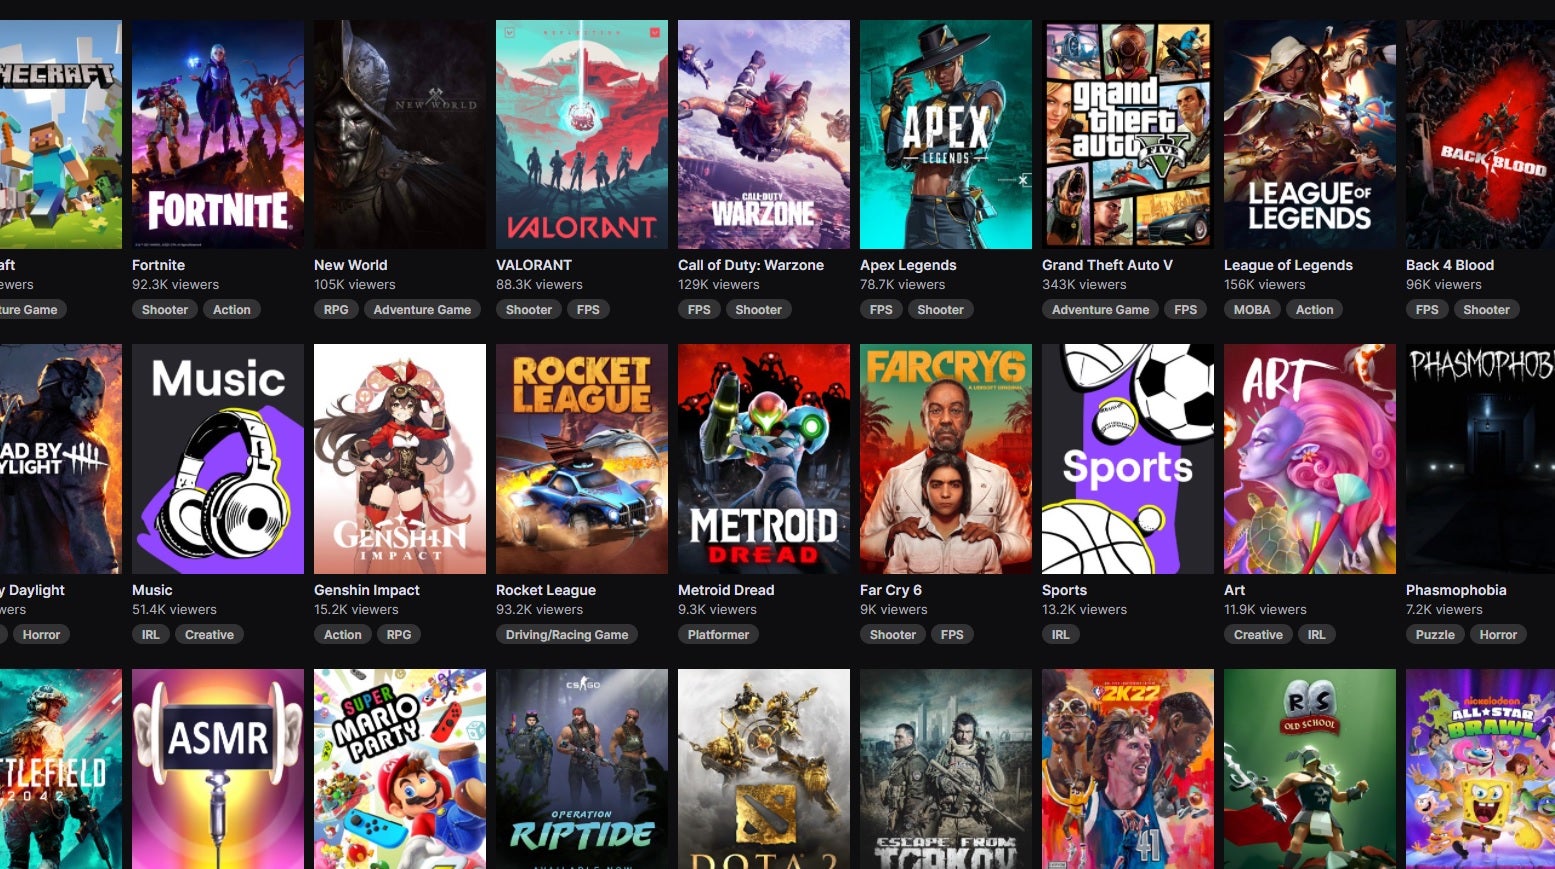 Twitch's homepage in October 2021, showing top game categories currently being streamed to beginning with Minecraft, Fortnite, New World, and more